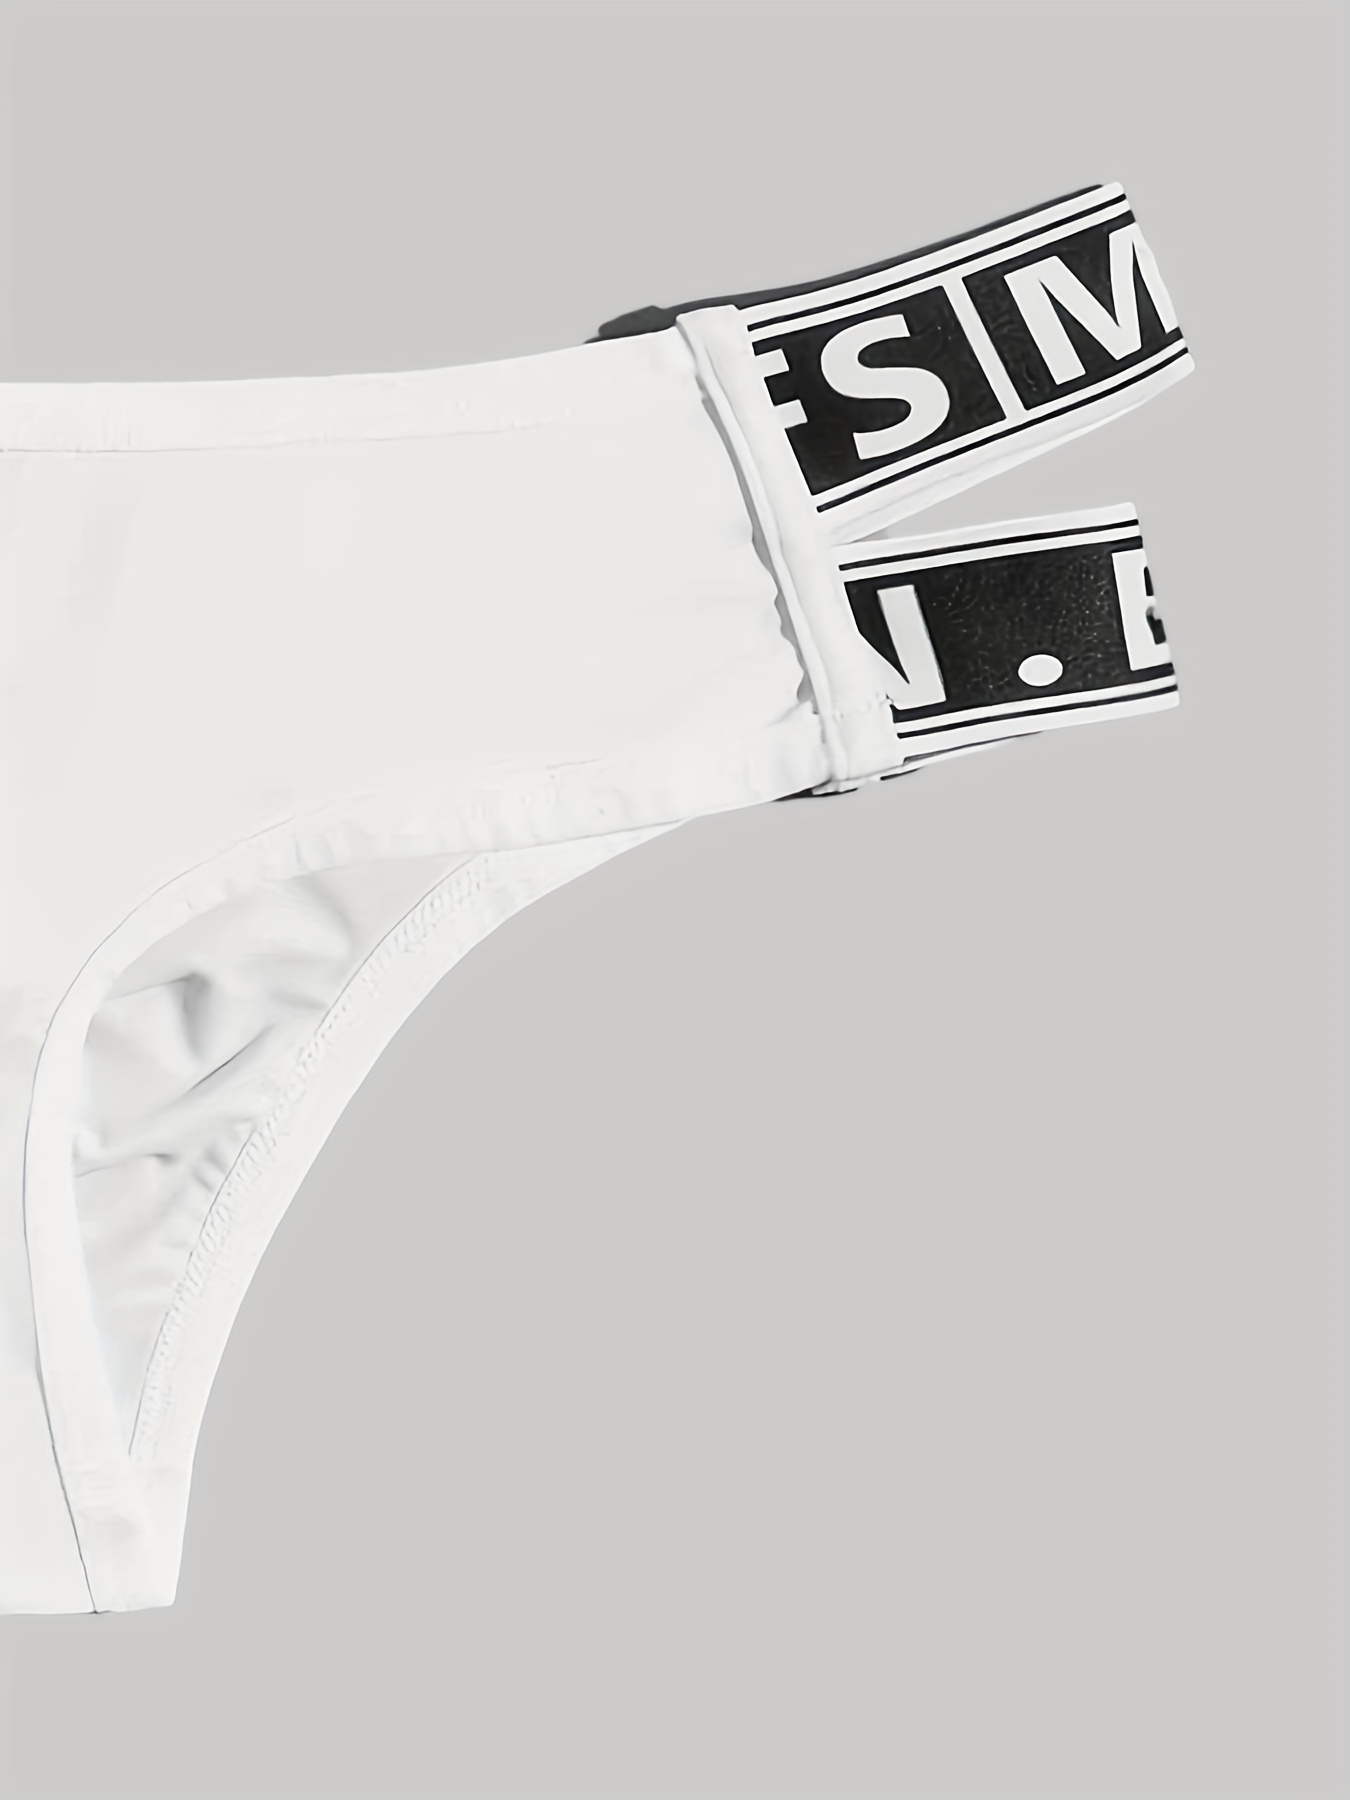 Men's Nylon Sexy Hollow Thongs & G-strings, Breathable Comfy